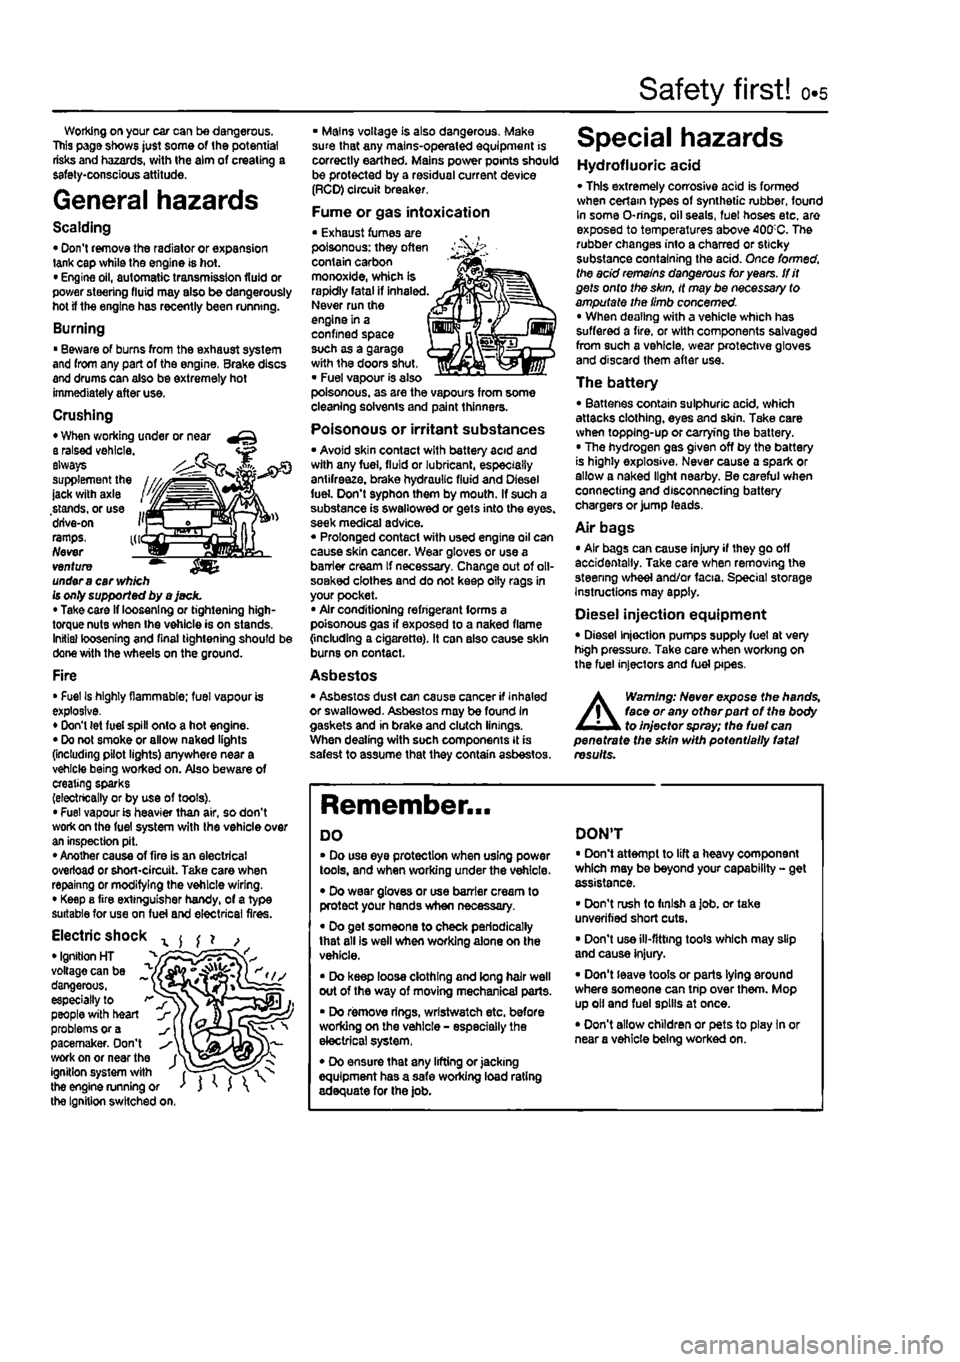 FIAT PUNTO 1994 176 / 1.G Workshop Manual 
Safety first! 0.5 
Working on your ear can be dangerous. This page shows just some of the potential risks and hazards, with the aim of creating a safety-conscious attitude. 
General hazards 
Scalding